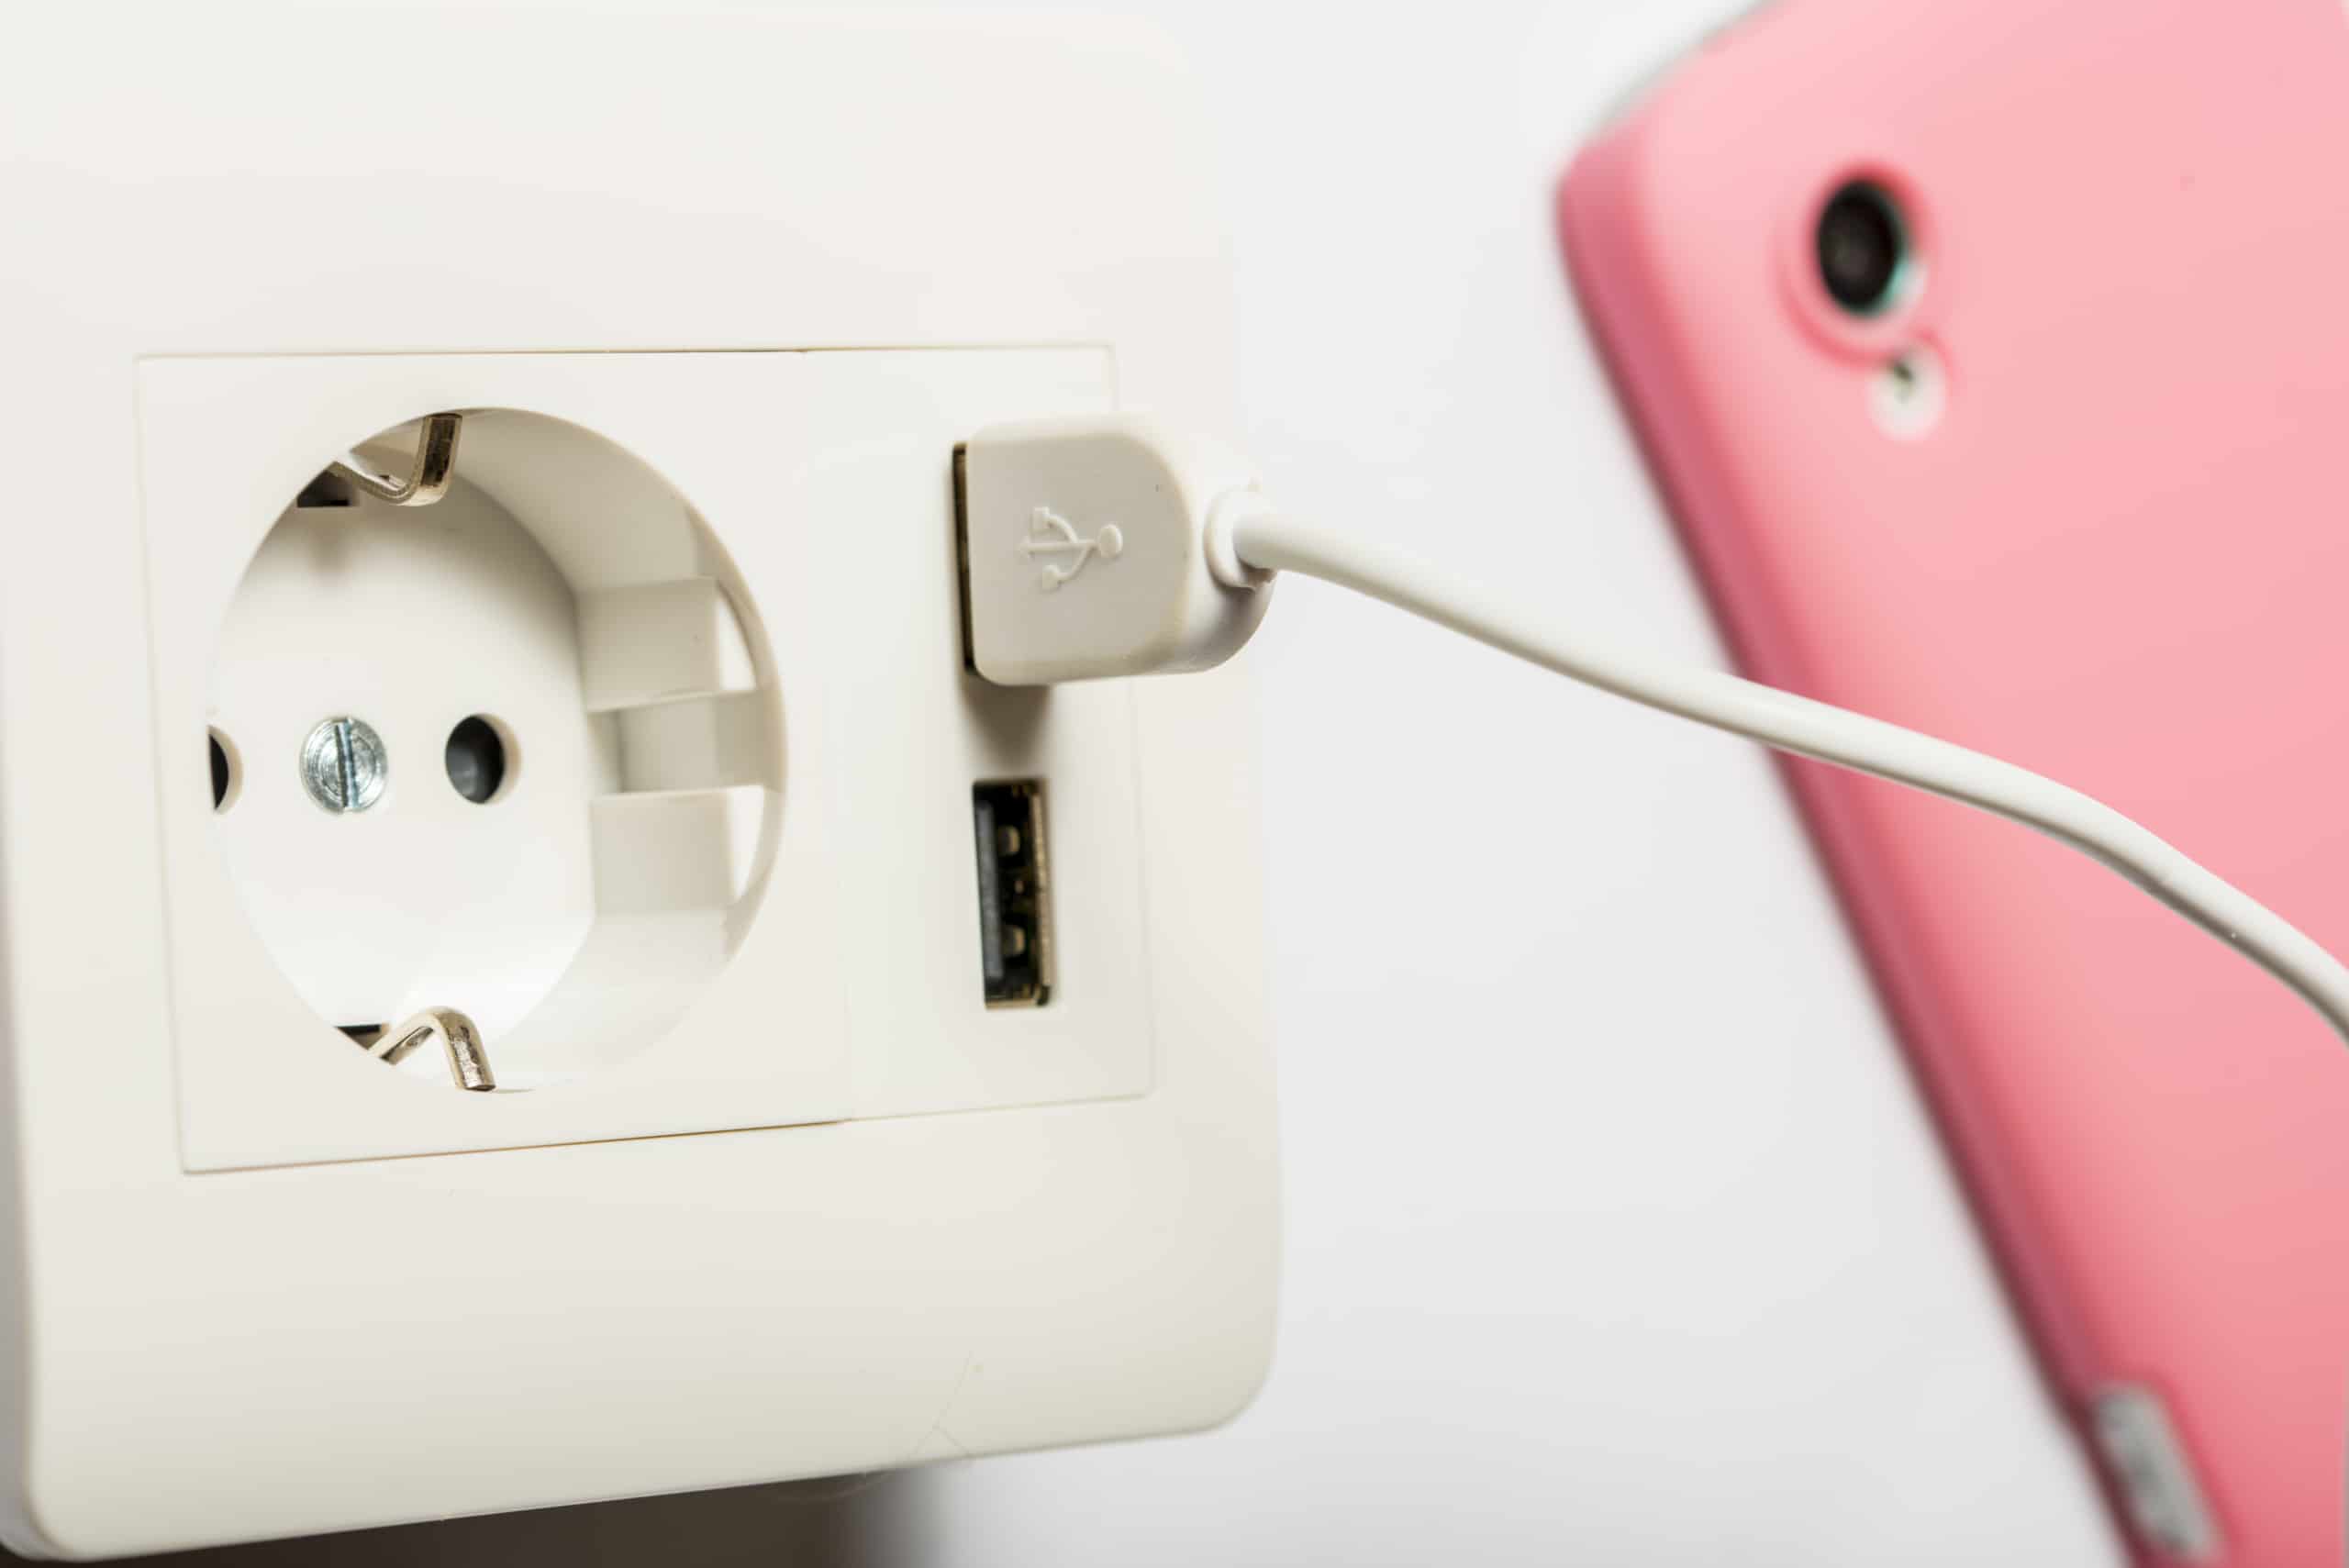 Charging. The smartphone charging from the socket, with two usb-charger ports.